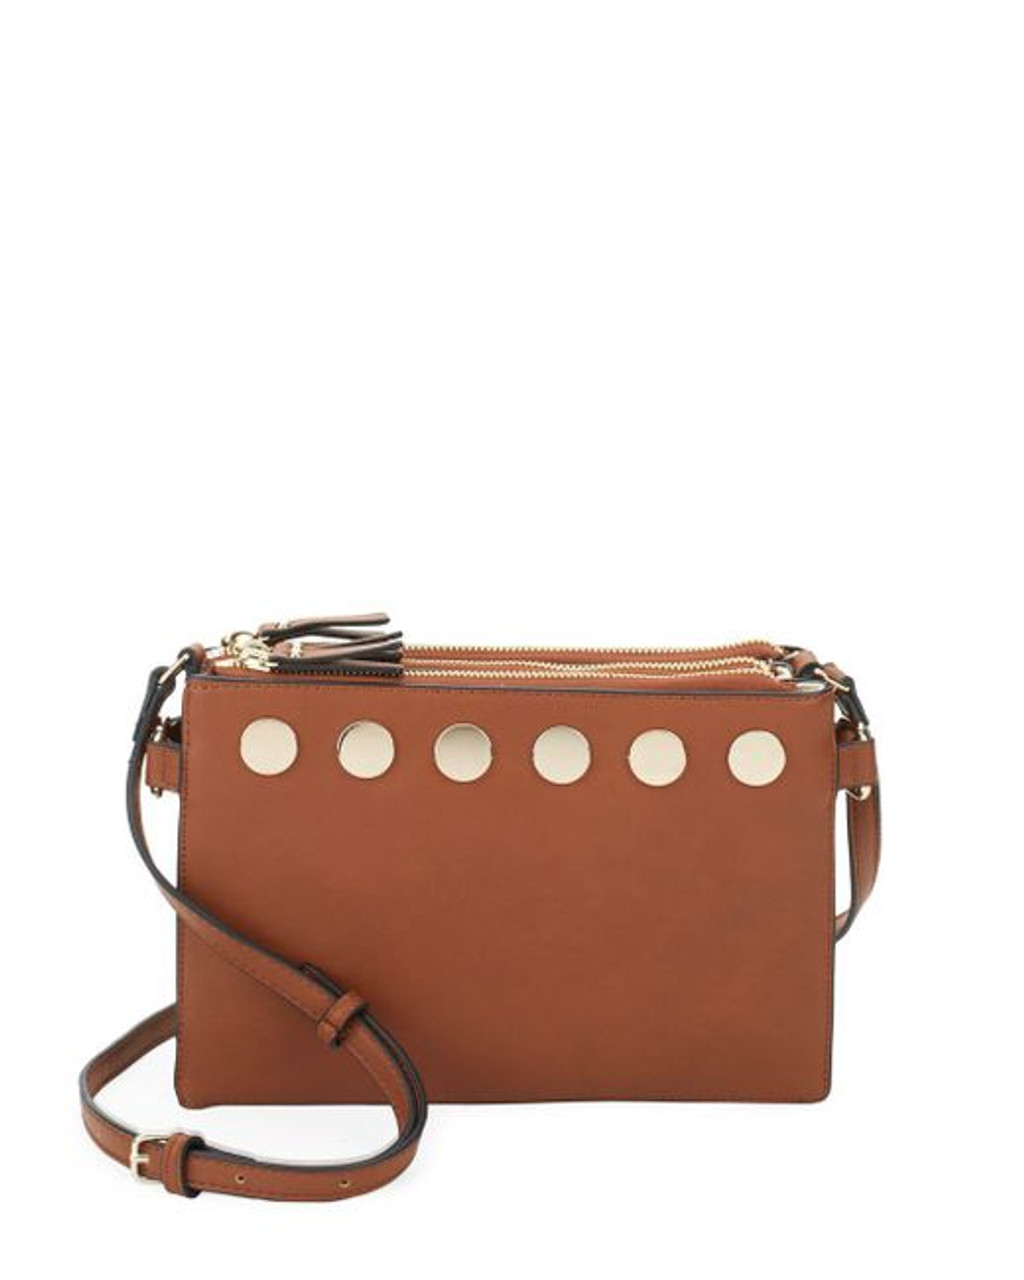 french connection handbags | Nordstrom